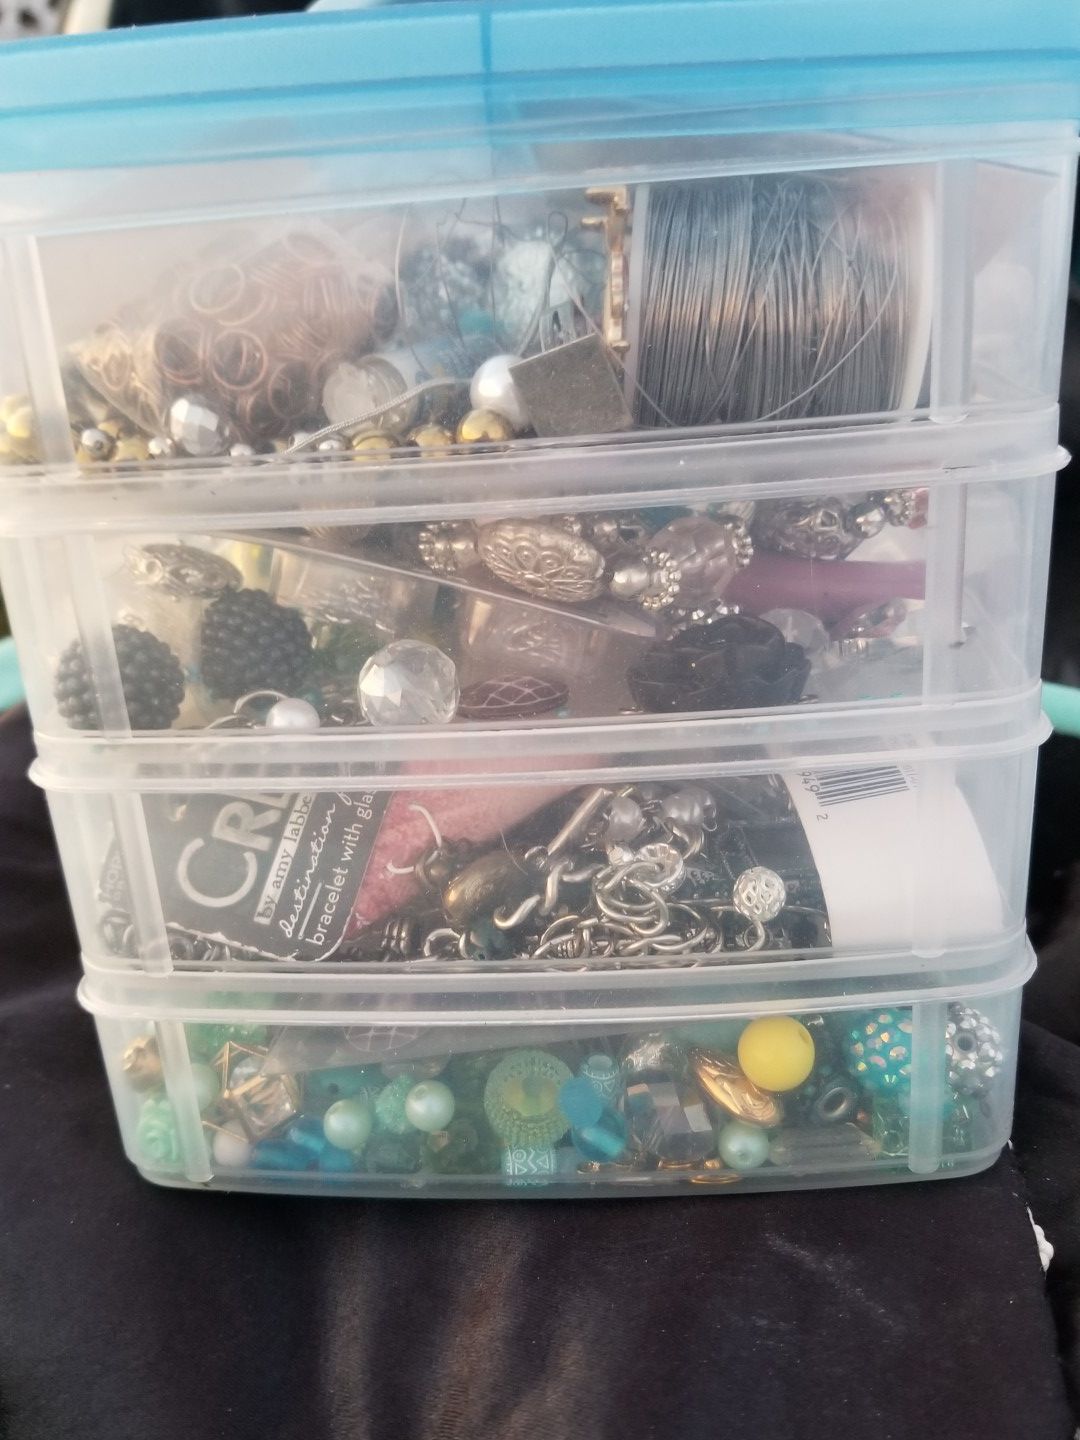 Beads, charms, chains and more